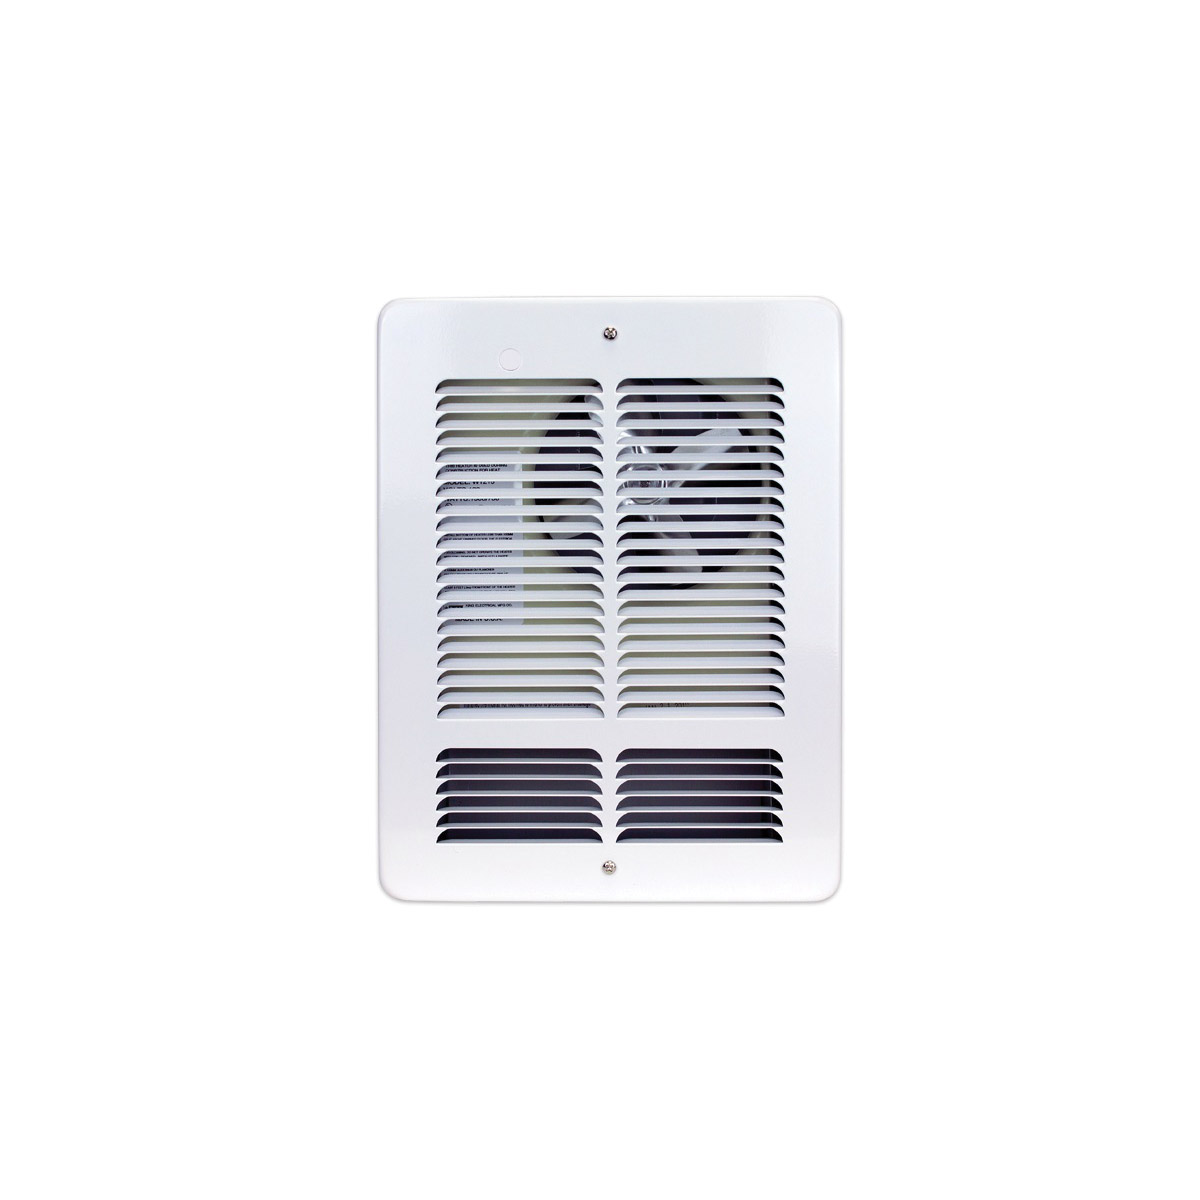 King W Series W2415-W Wall Heater, 3.1/6.25 A, 240 V, 750/1500 W, 5118 Btu/hr BTU, 500 sq-ft Heating Area, White - 3